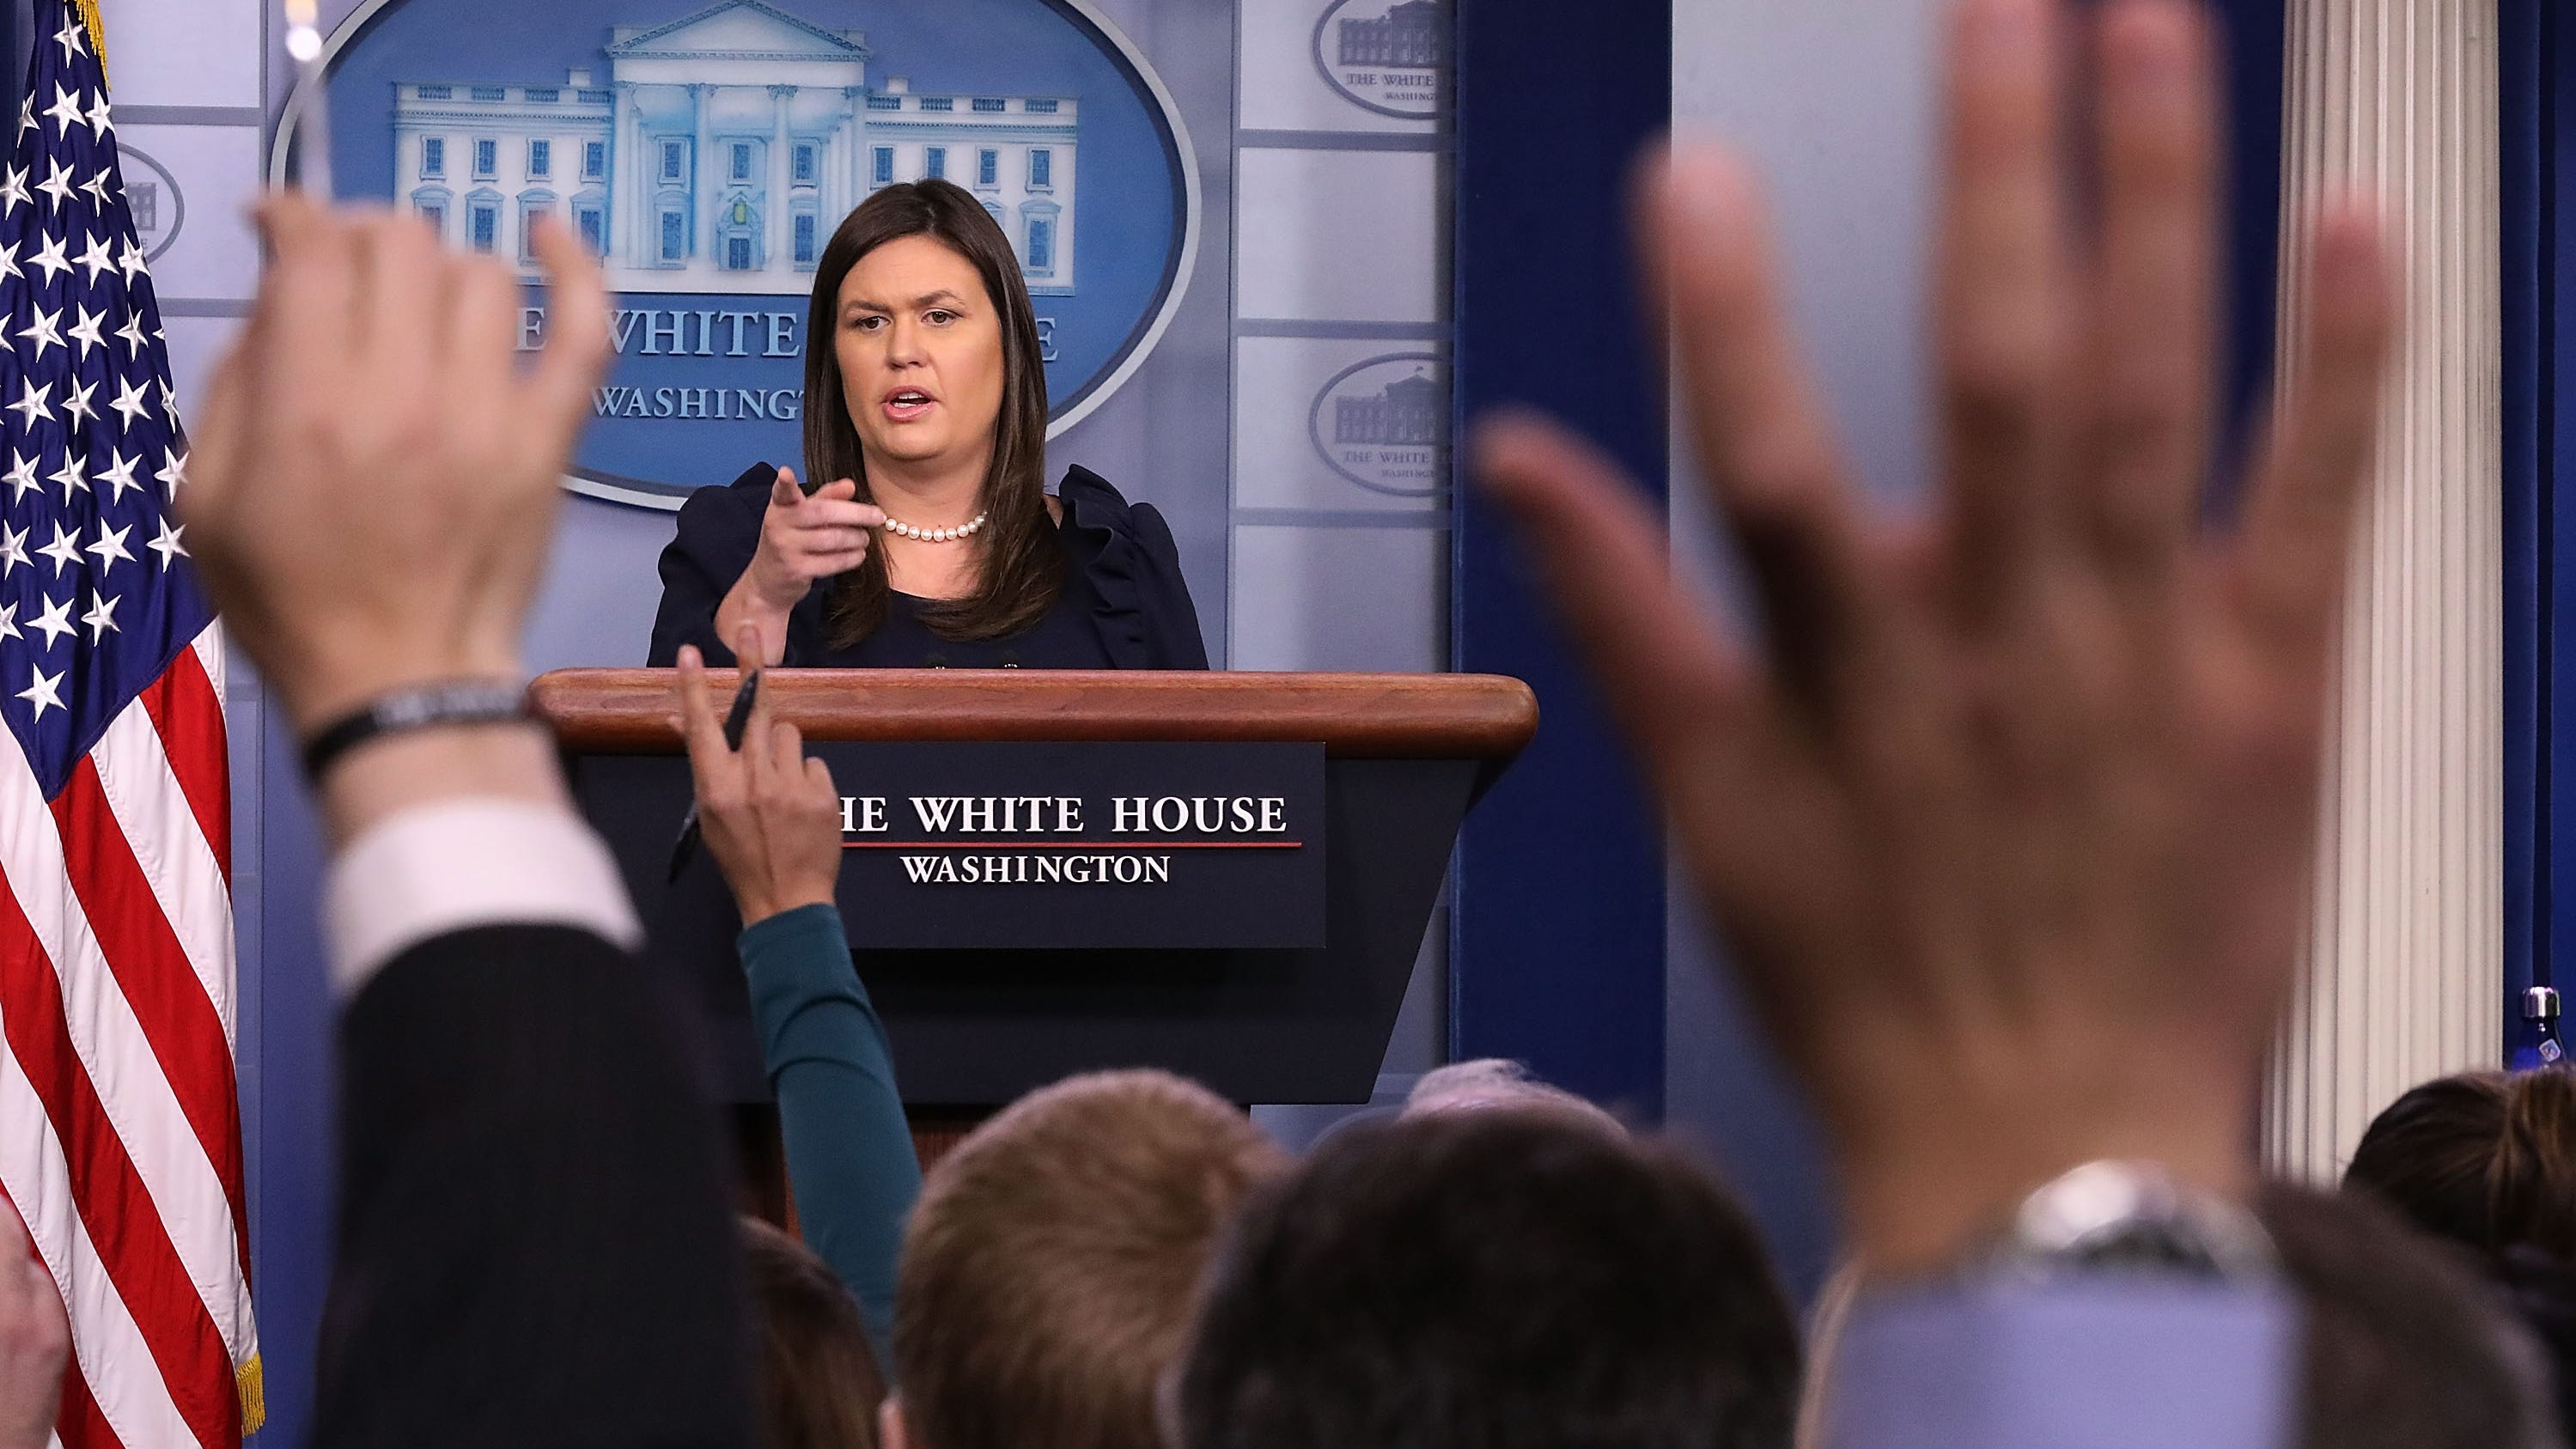 White House reporters make press briefings into performances